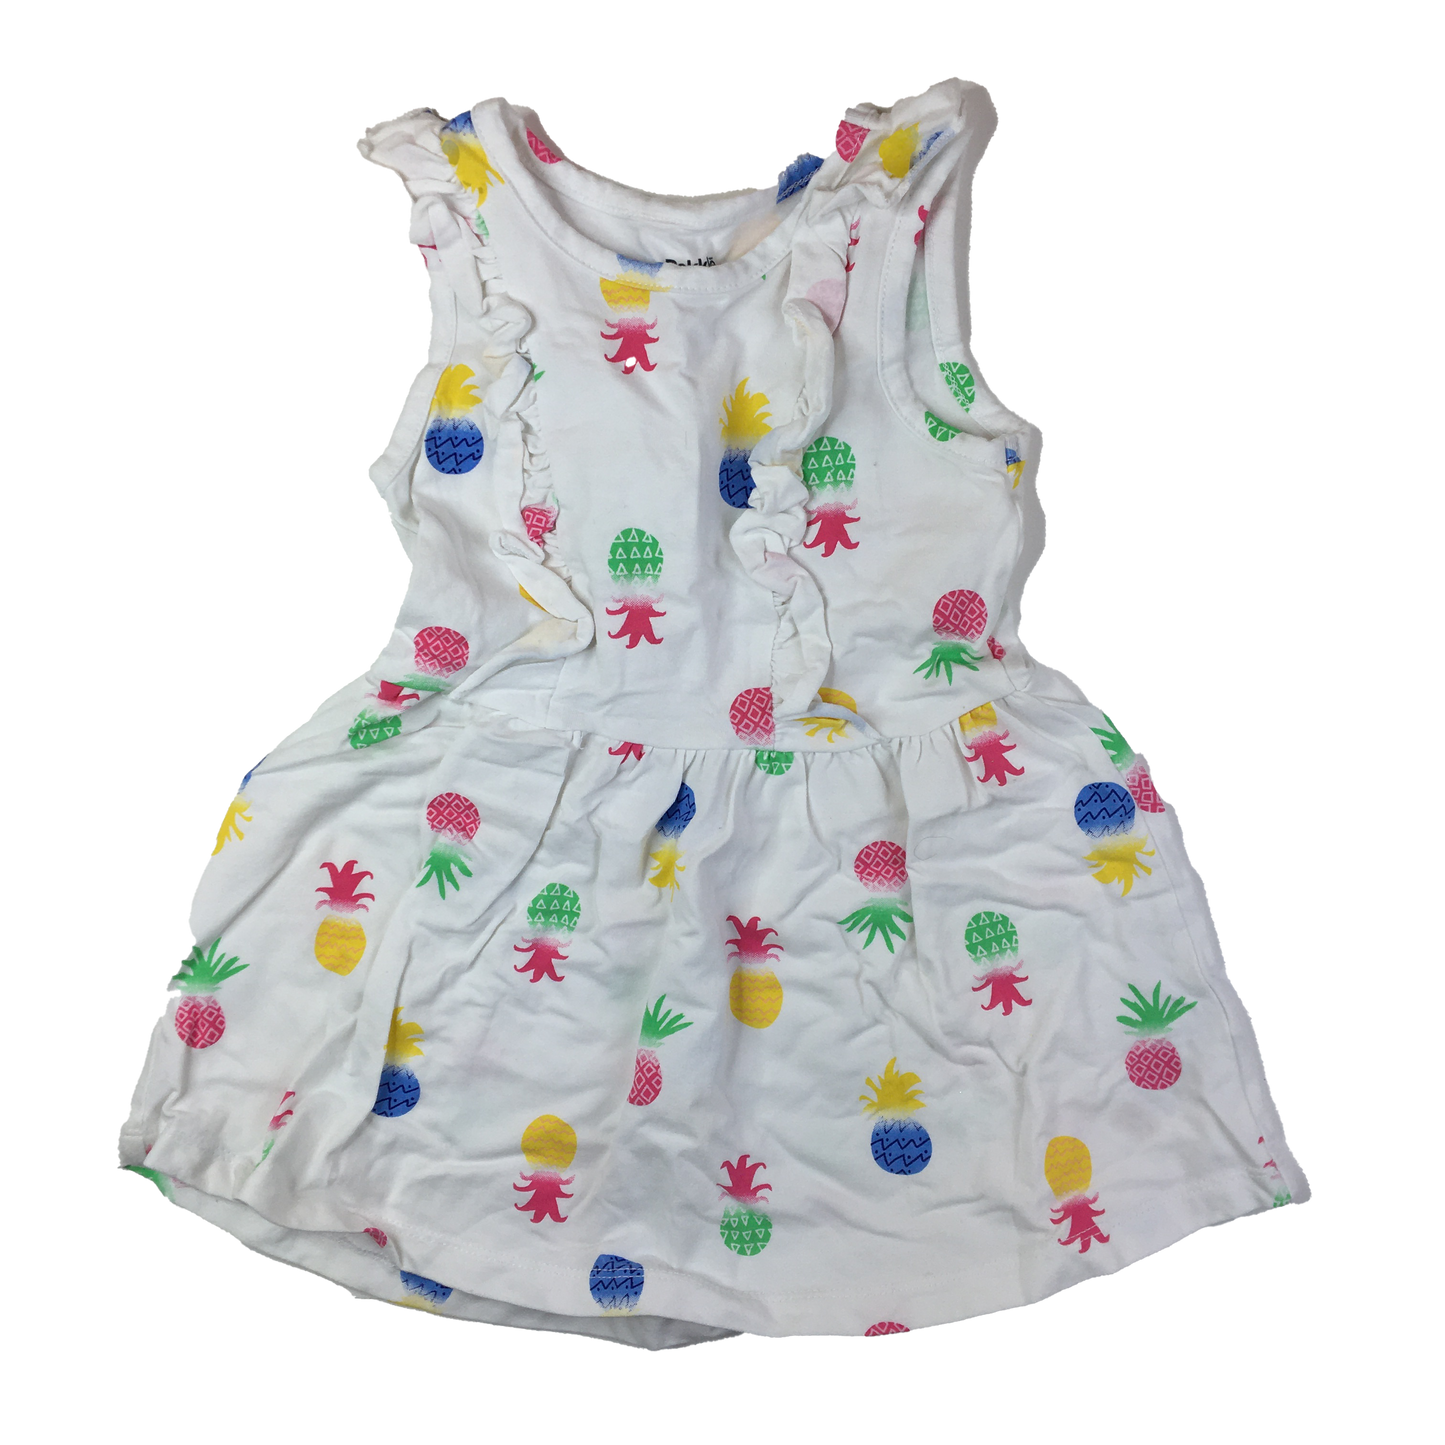 Pekkle White Dress with Pineapples 2T